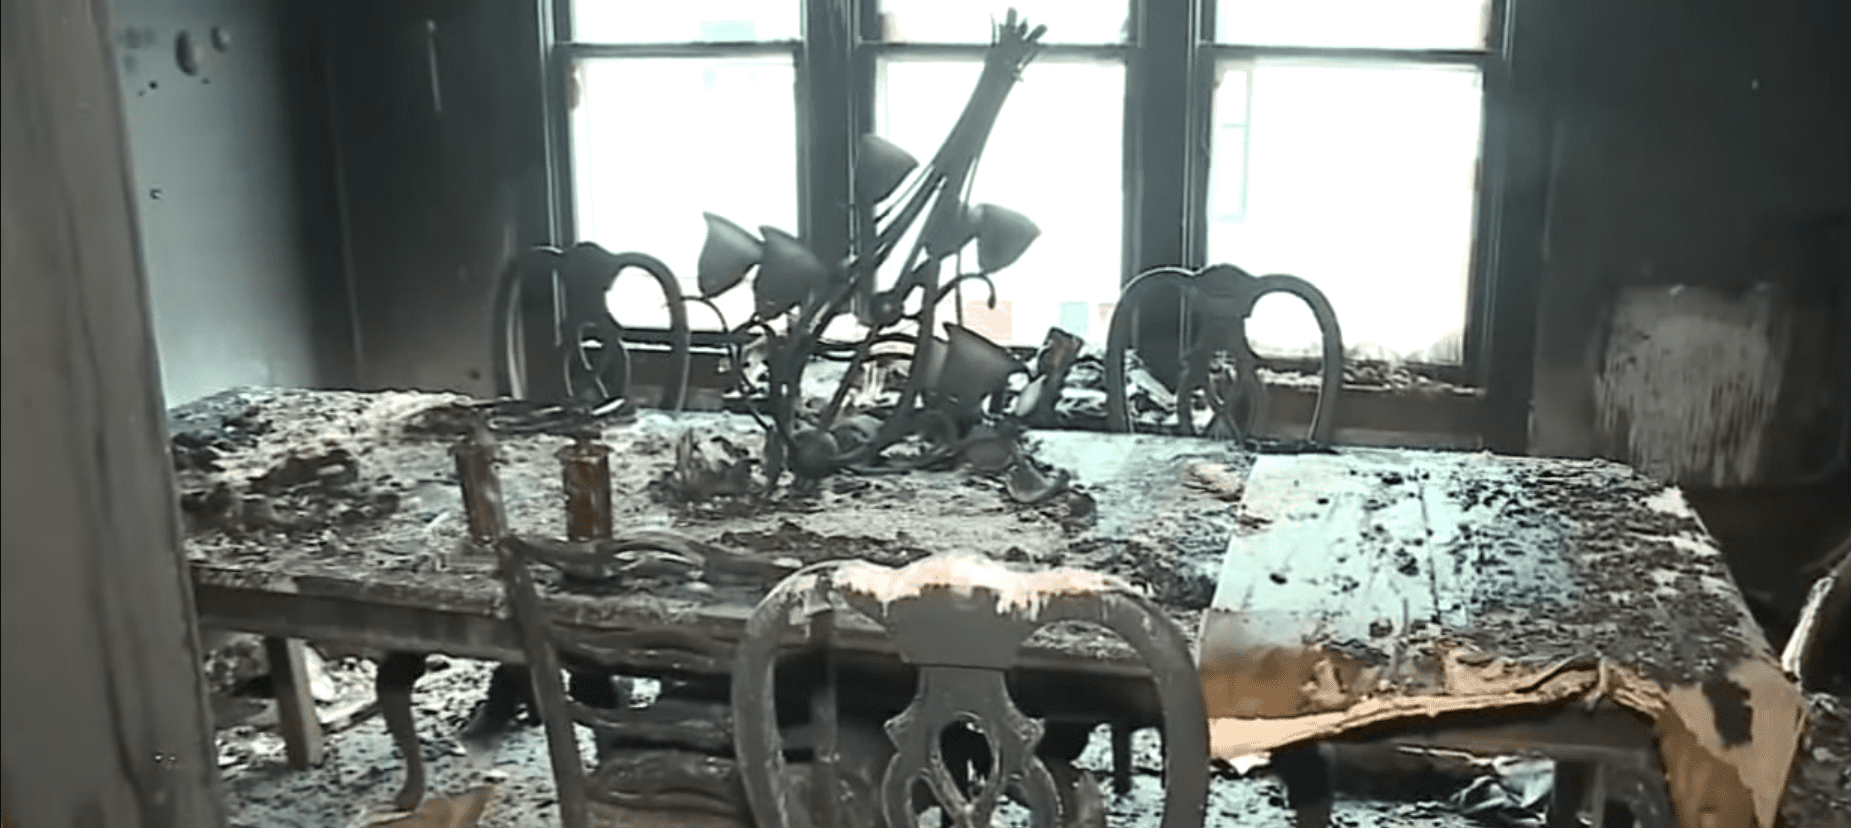 Most of the furnishings, such as the dining room table and chairs, were damaged because of the fire.